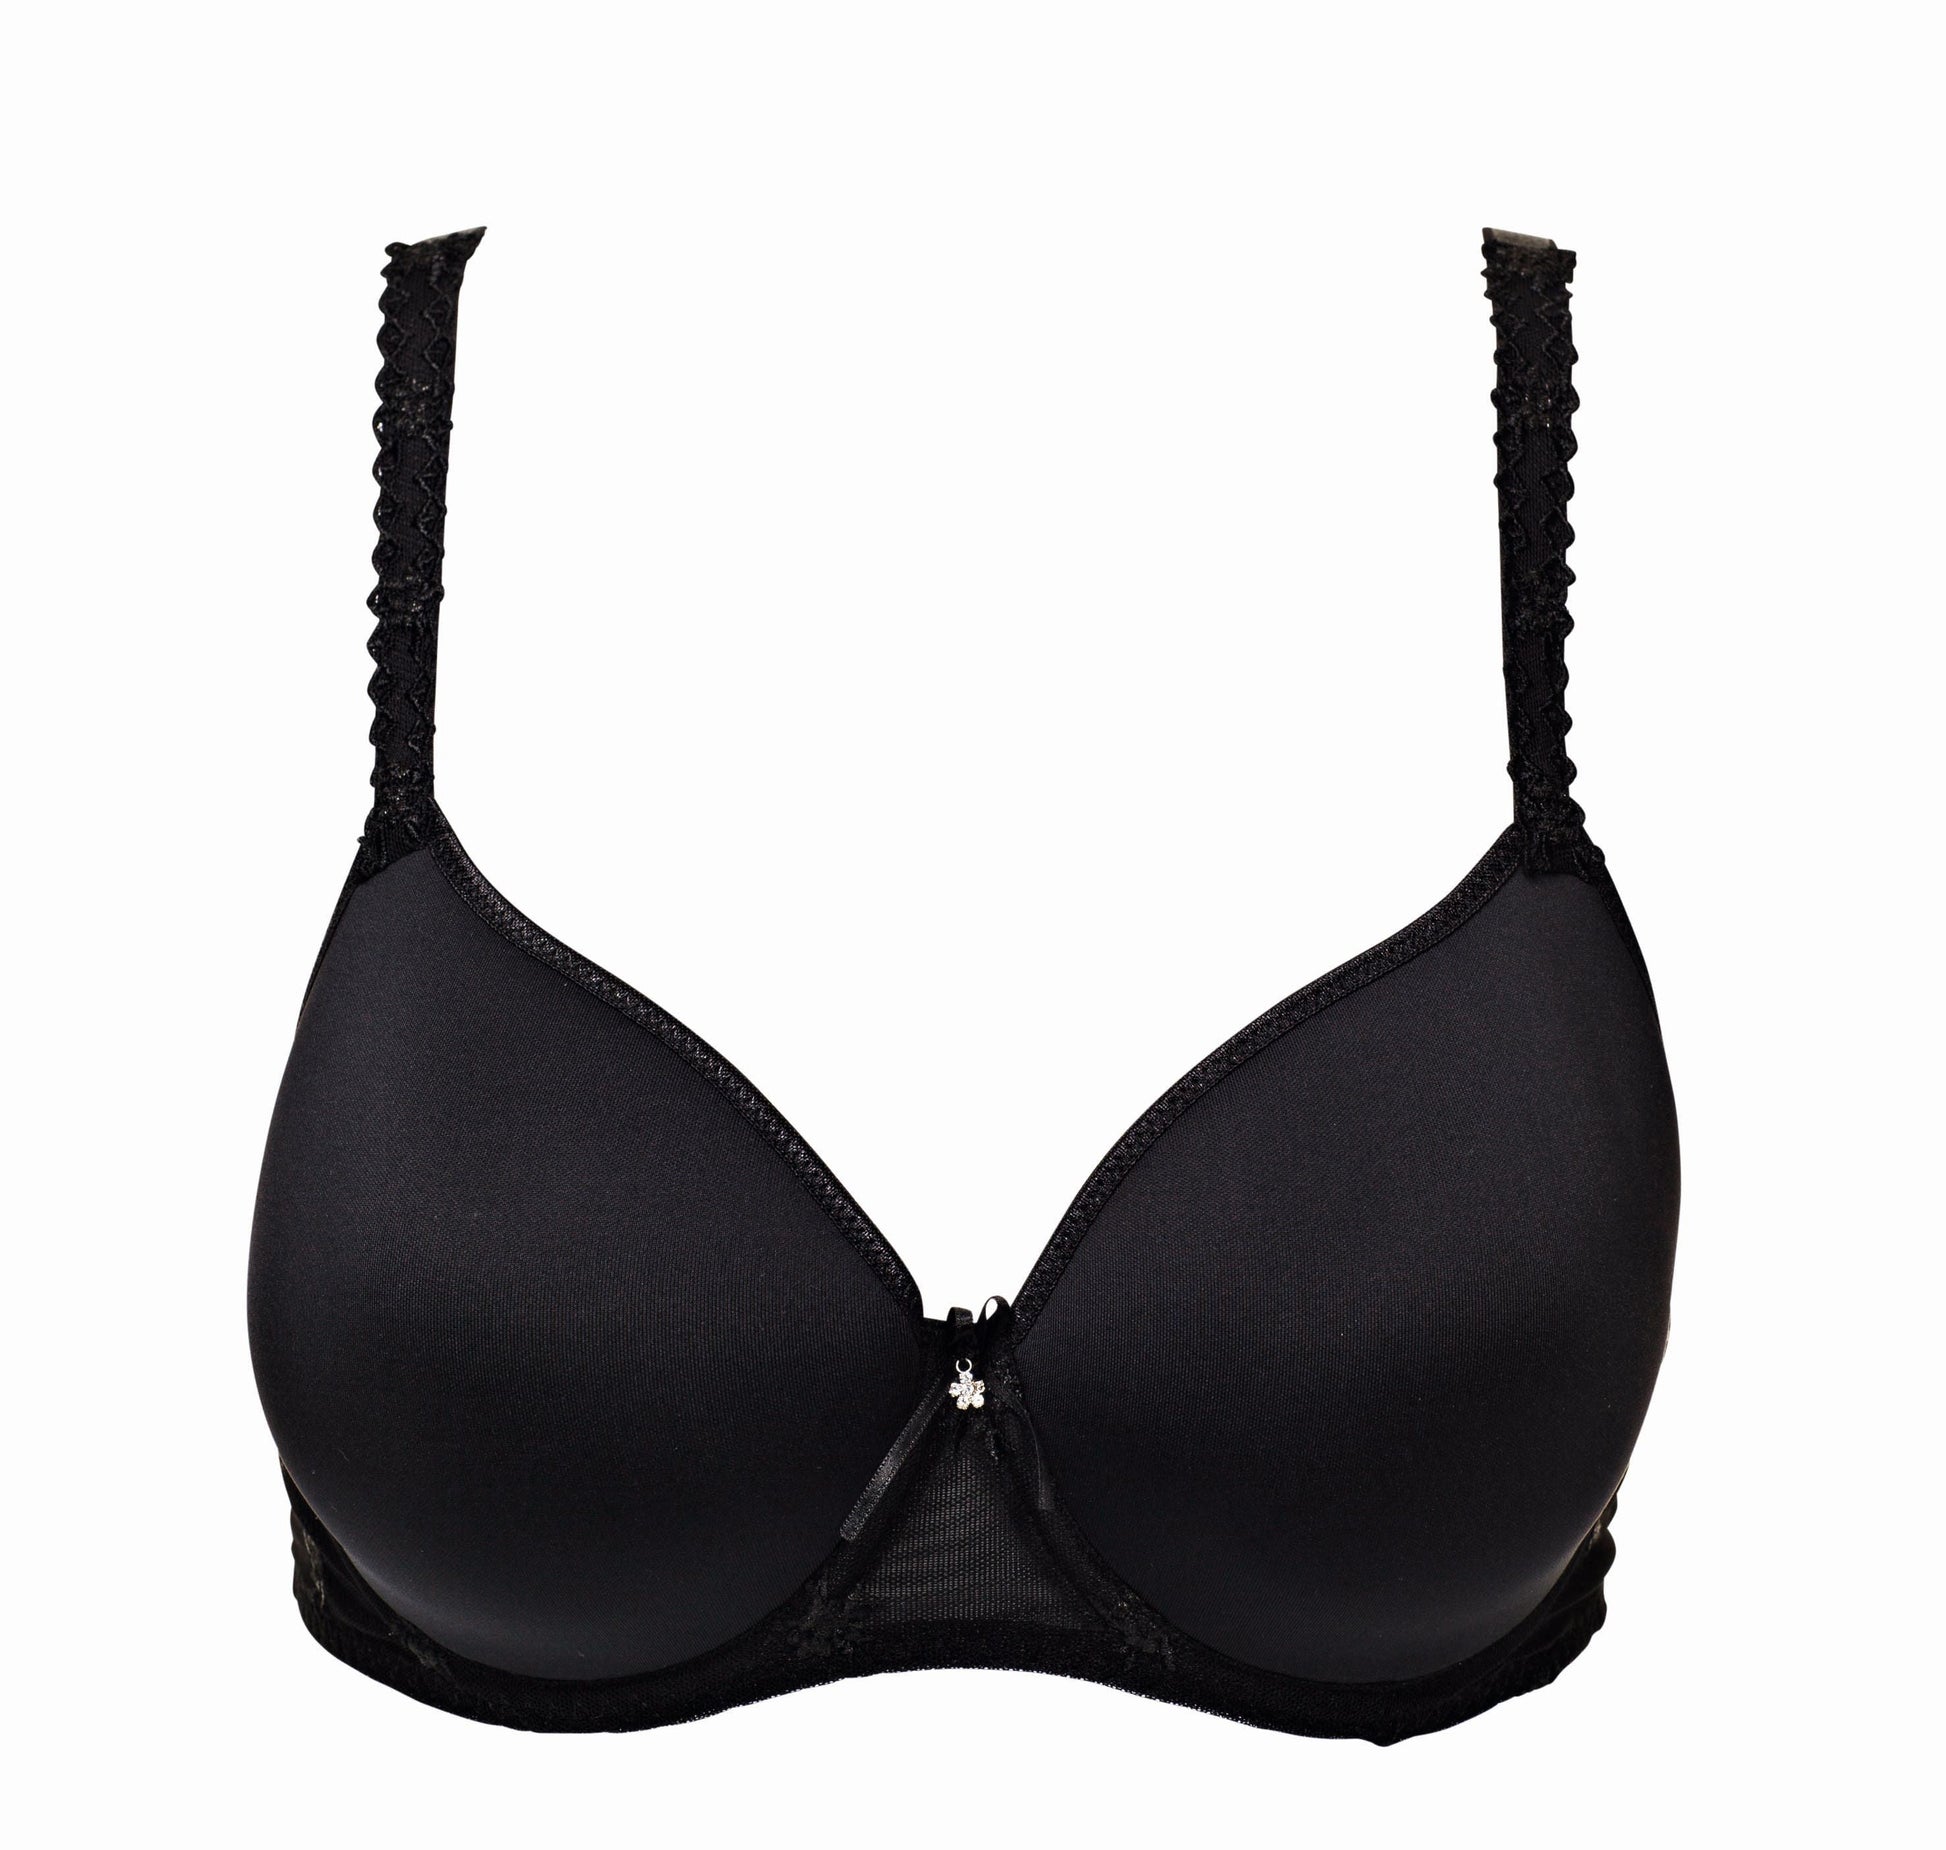 This Louisa Bracq spacer bra from the Chantilly line has strategically minimal decoration on the cups and no embroidery, affording increased invisibility when worn beneath clothing.